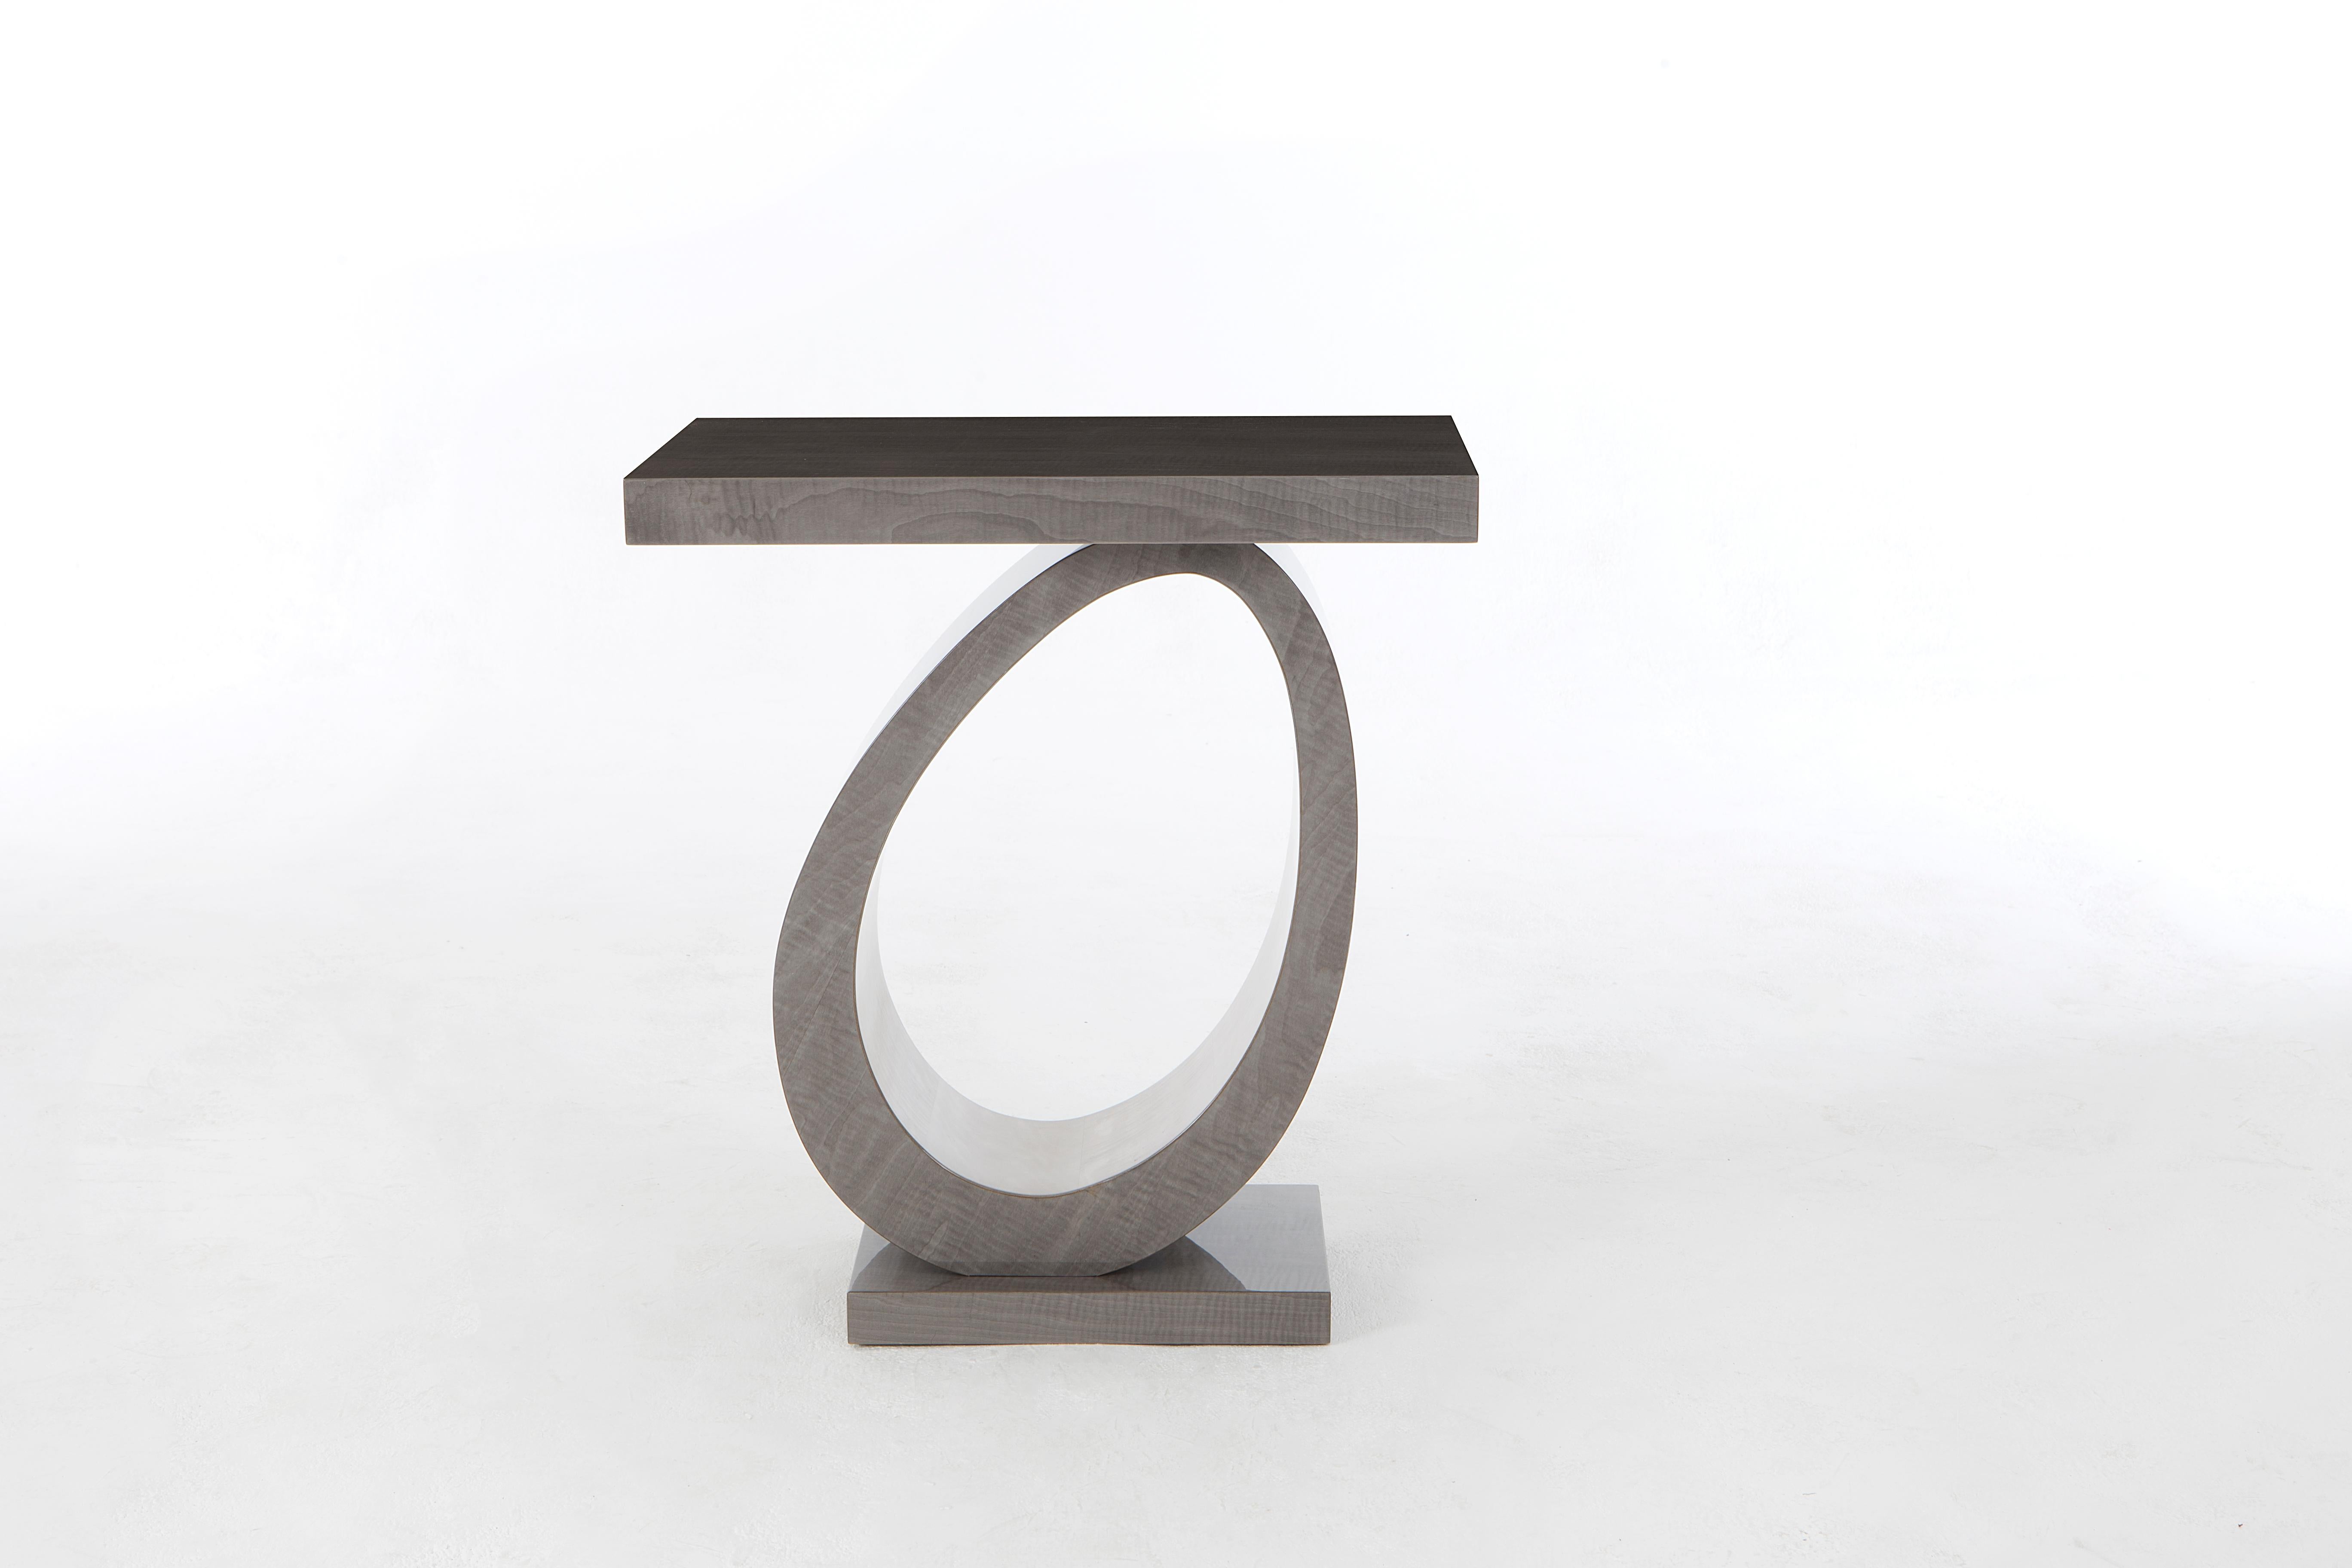 English Davidson's Modern, Artesian Occasional Table, in Slate Grey Sycamore Wood